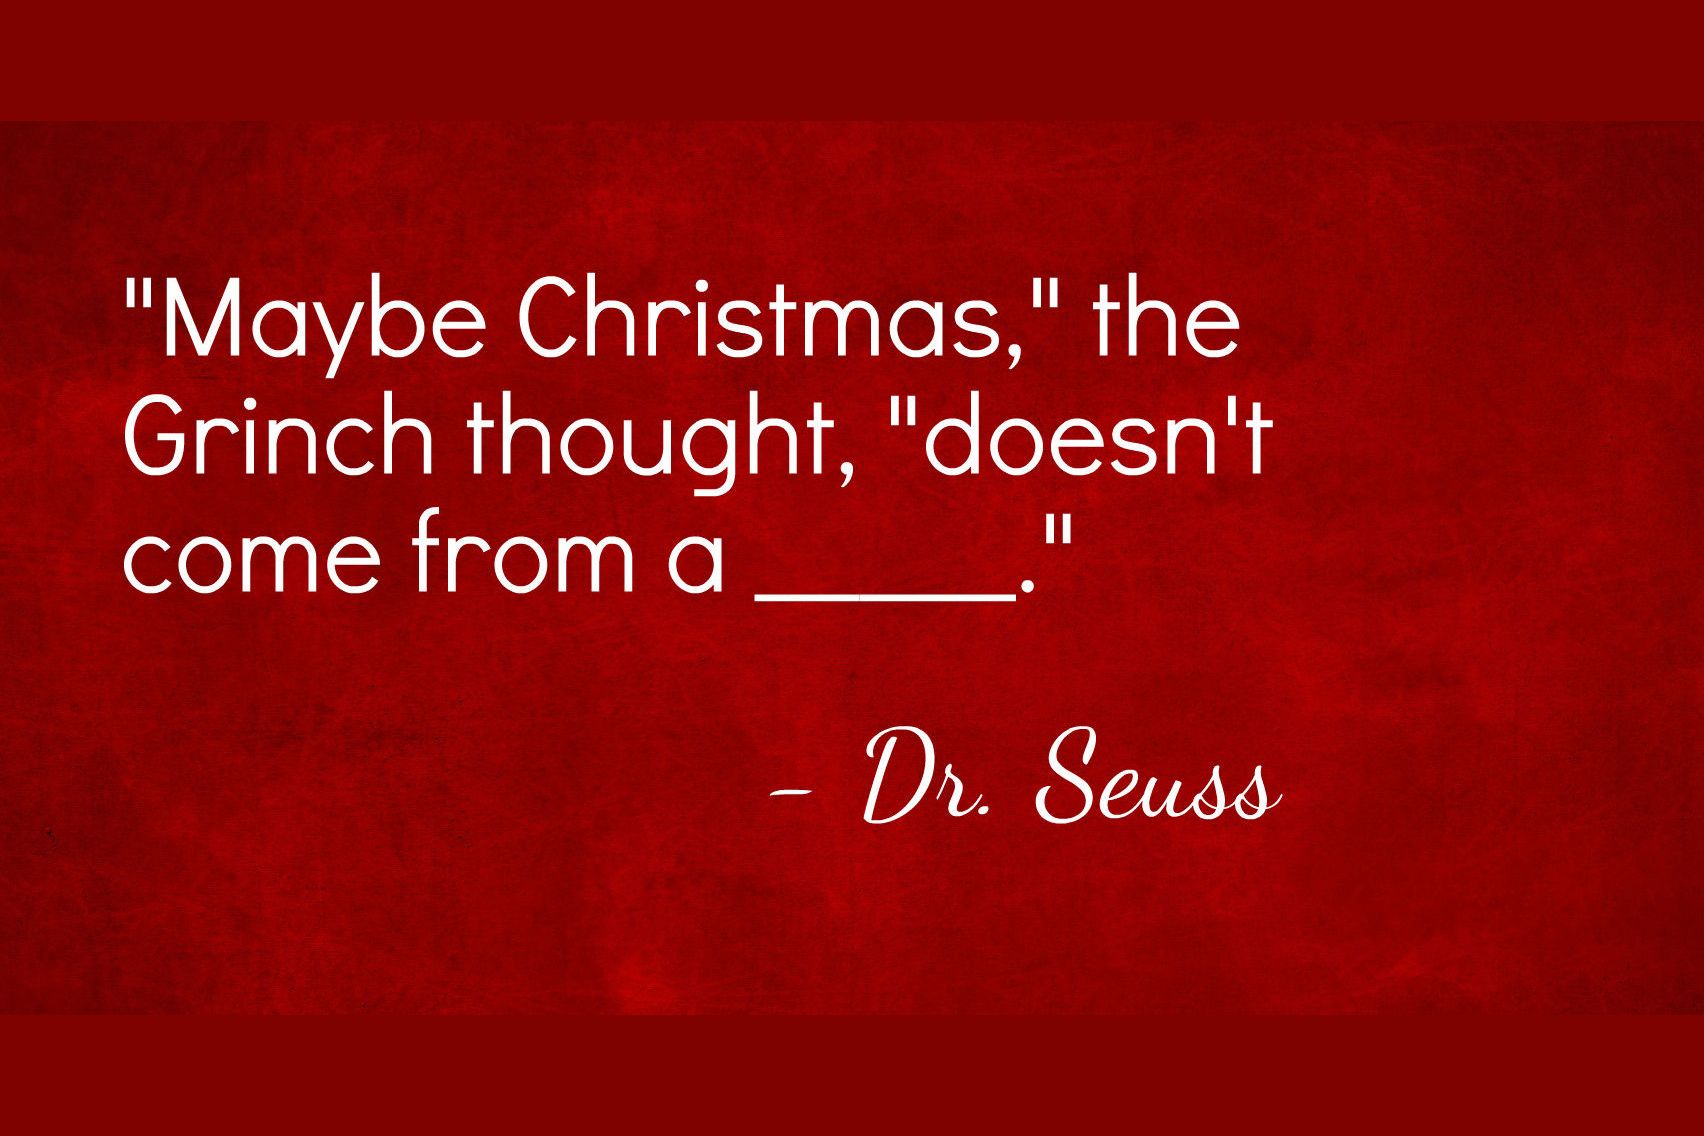 How Many Christmas Quotes Do You Remember?